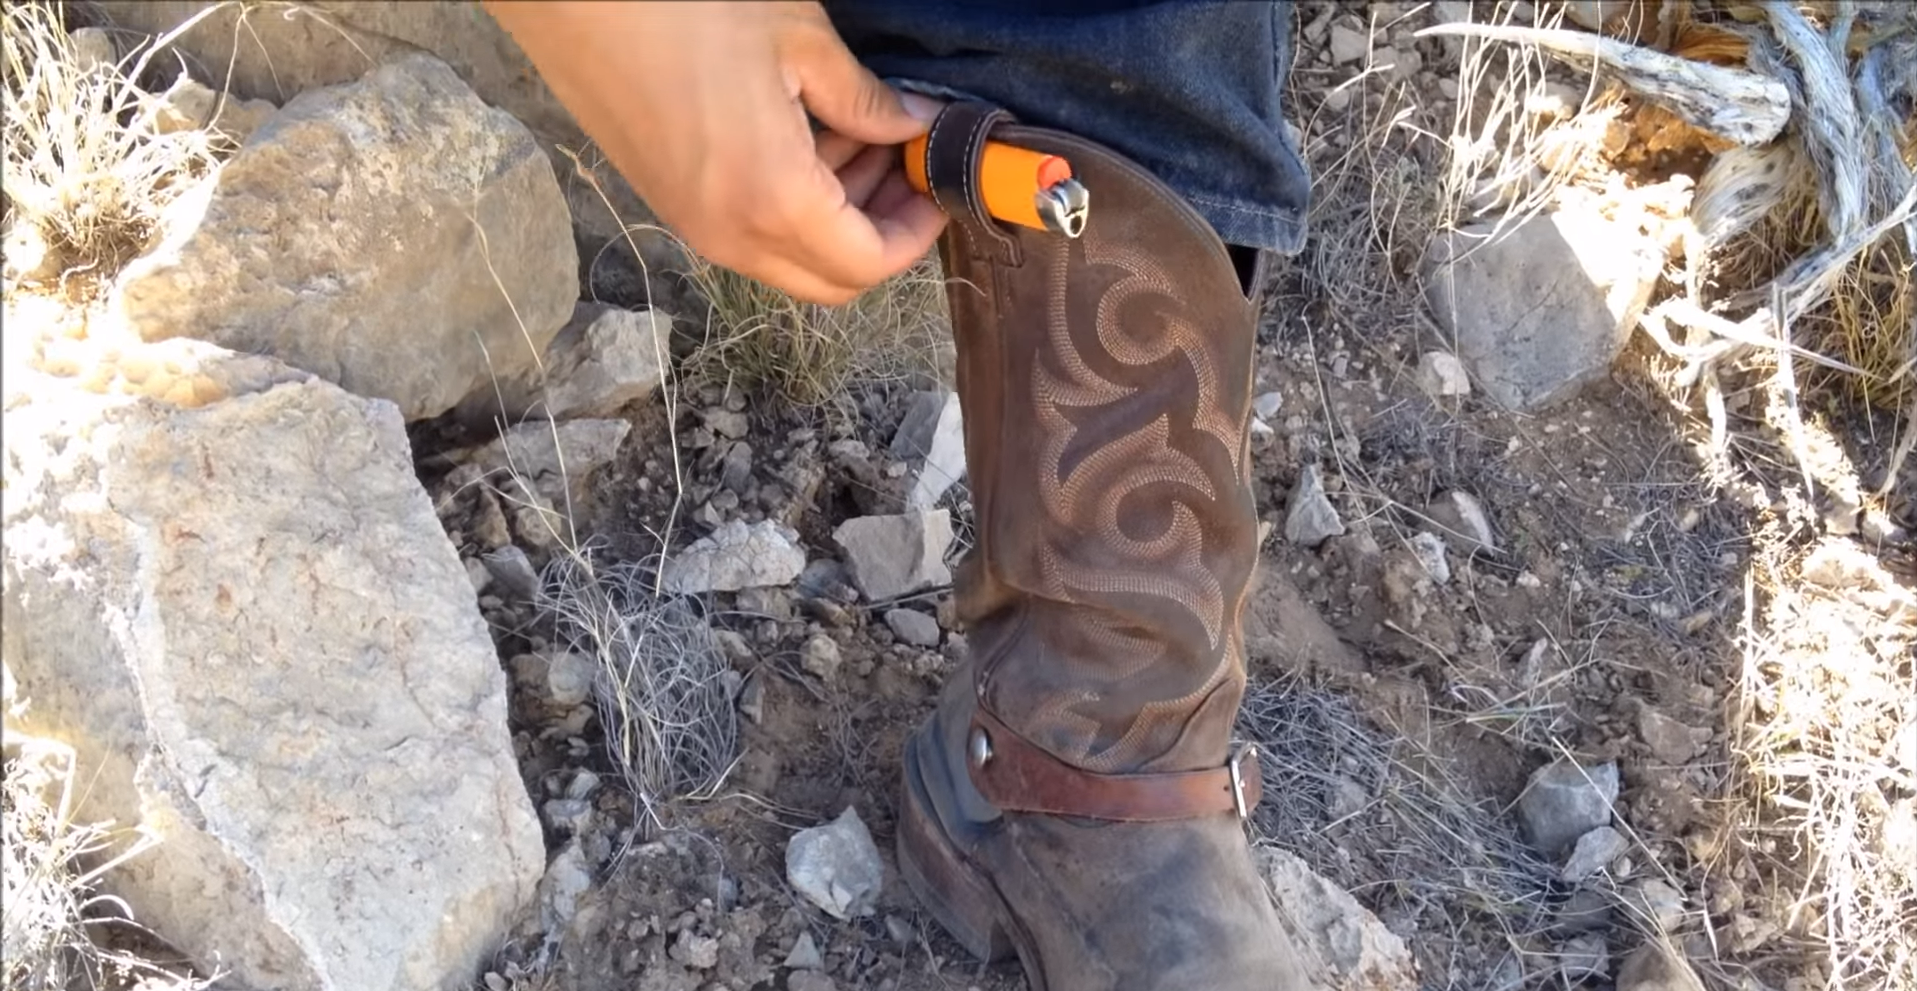 Is It a Good Idea to Hike in Cowboy Boots?